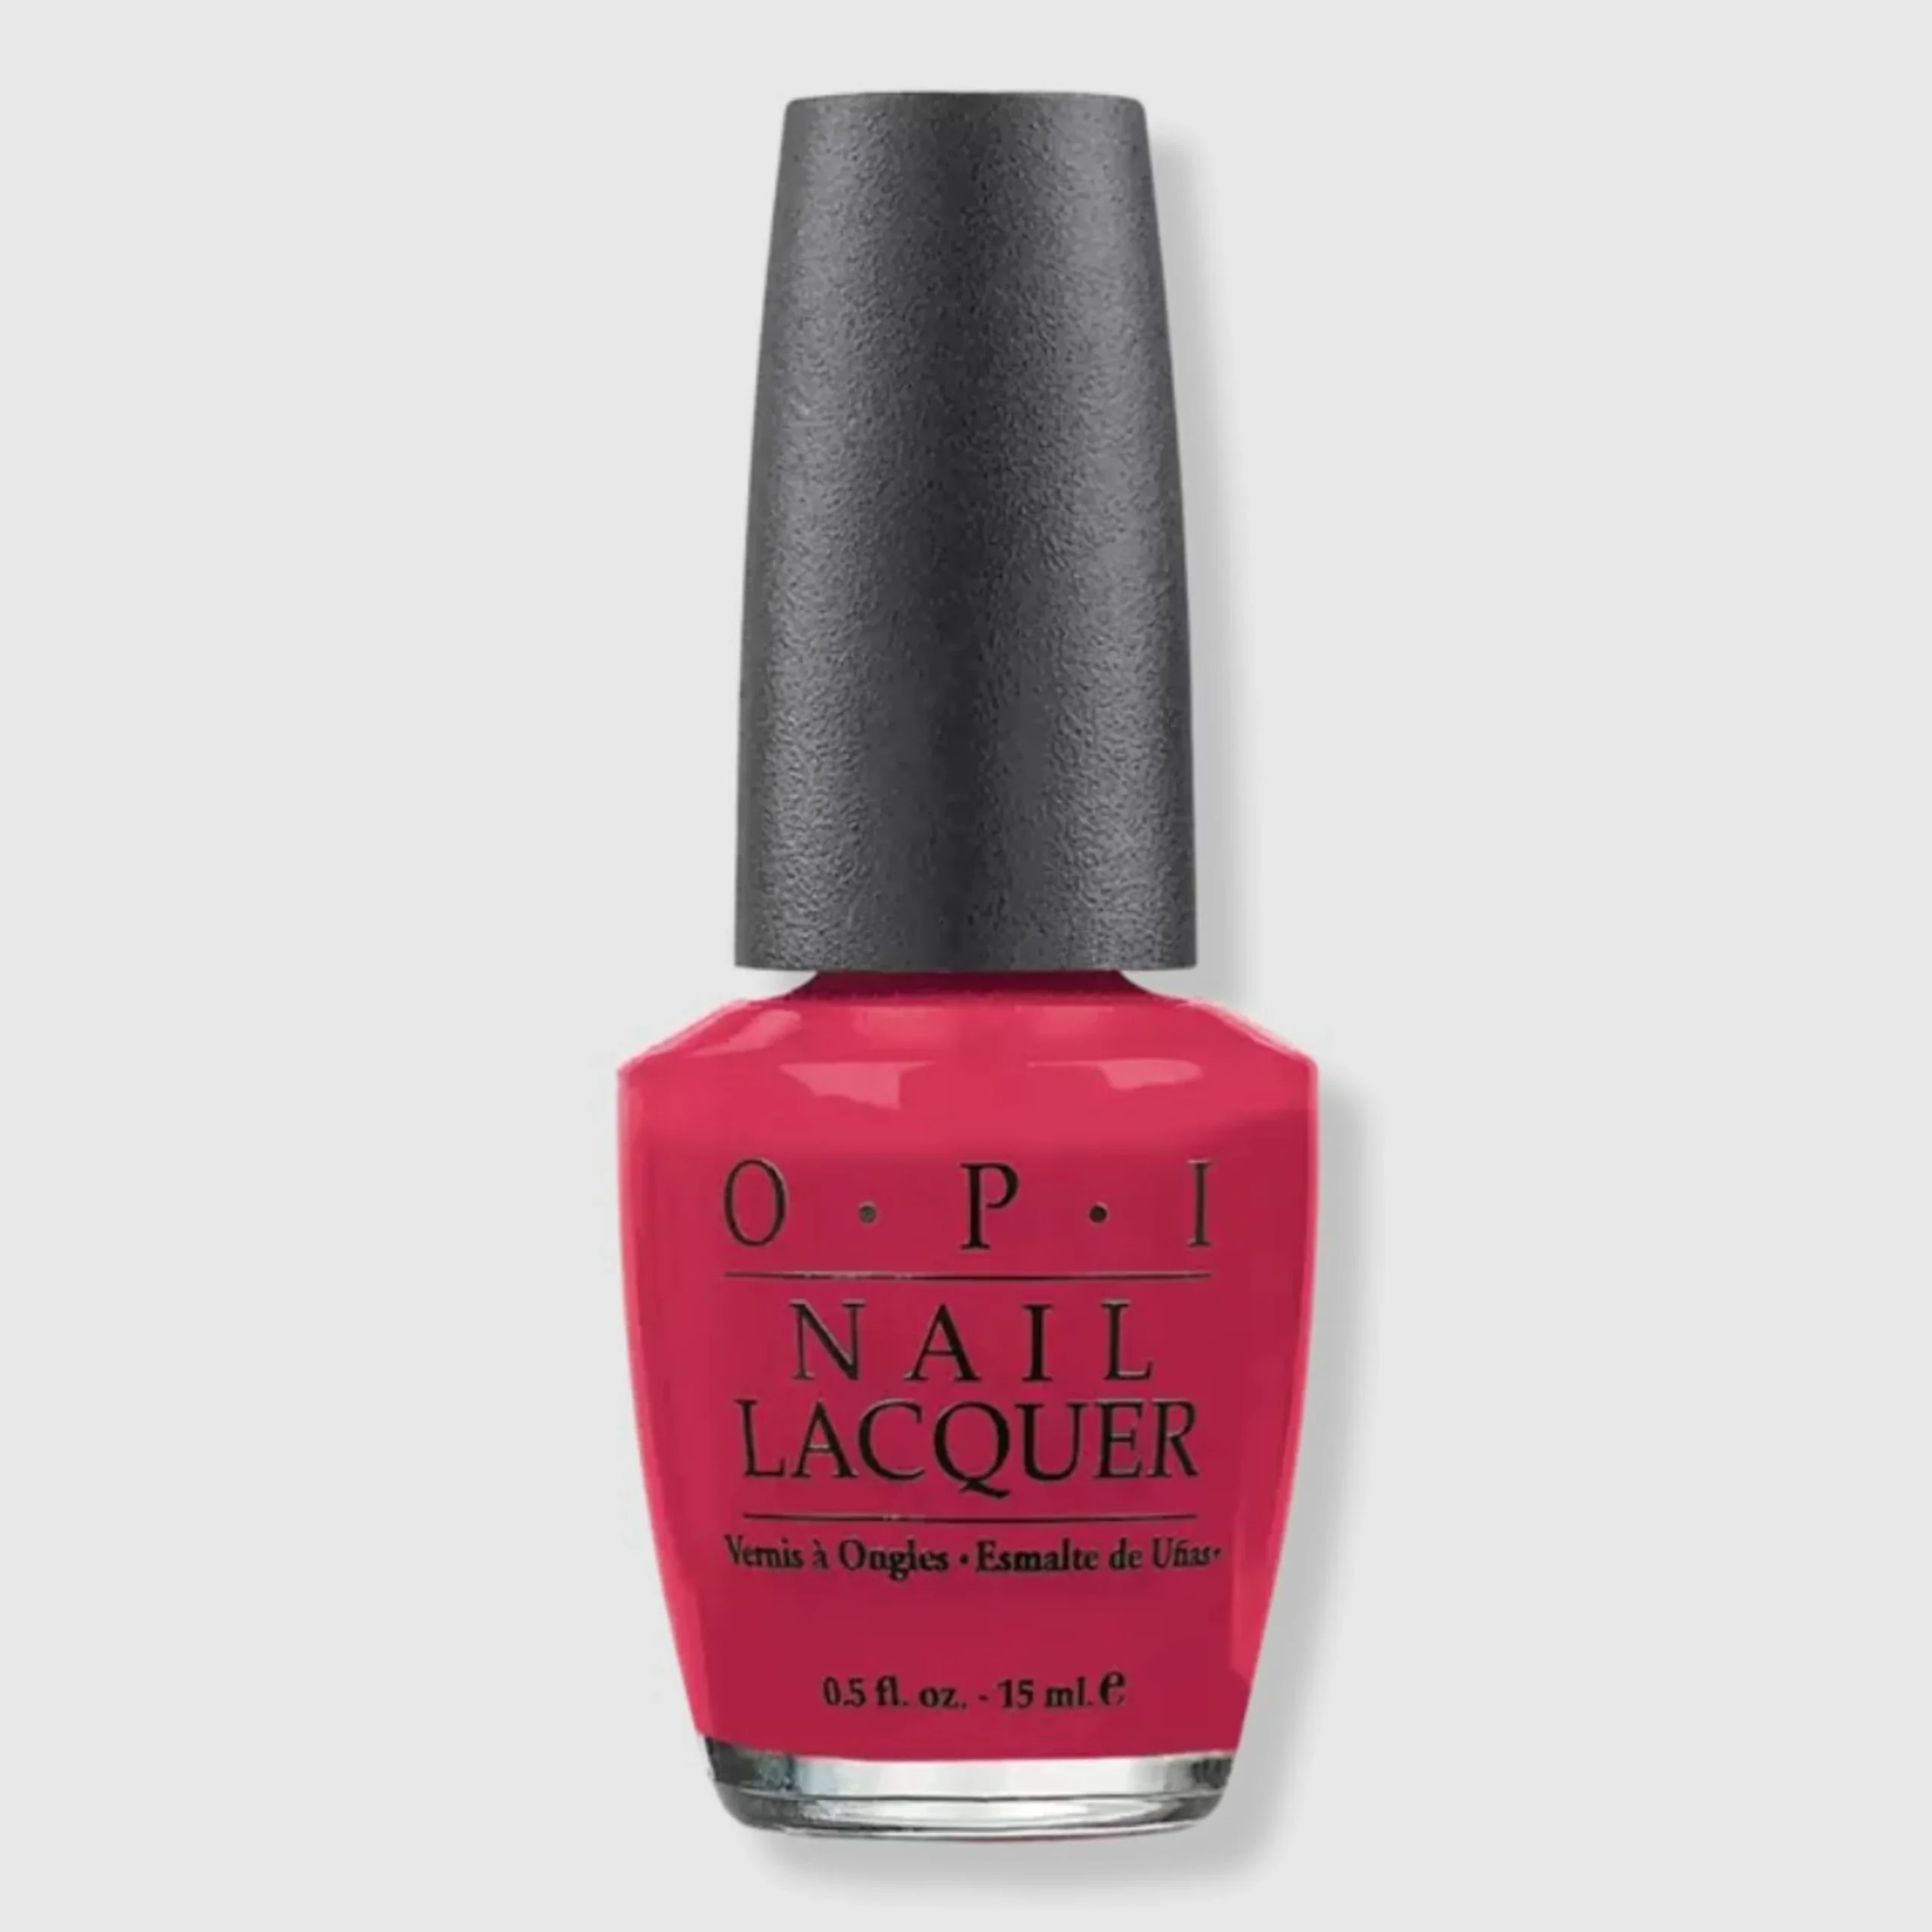 OPI Nail Lacquer in OPI Red